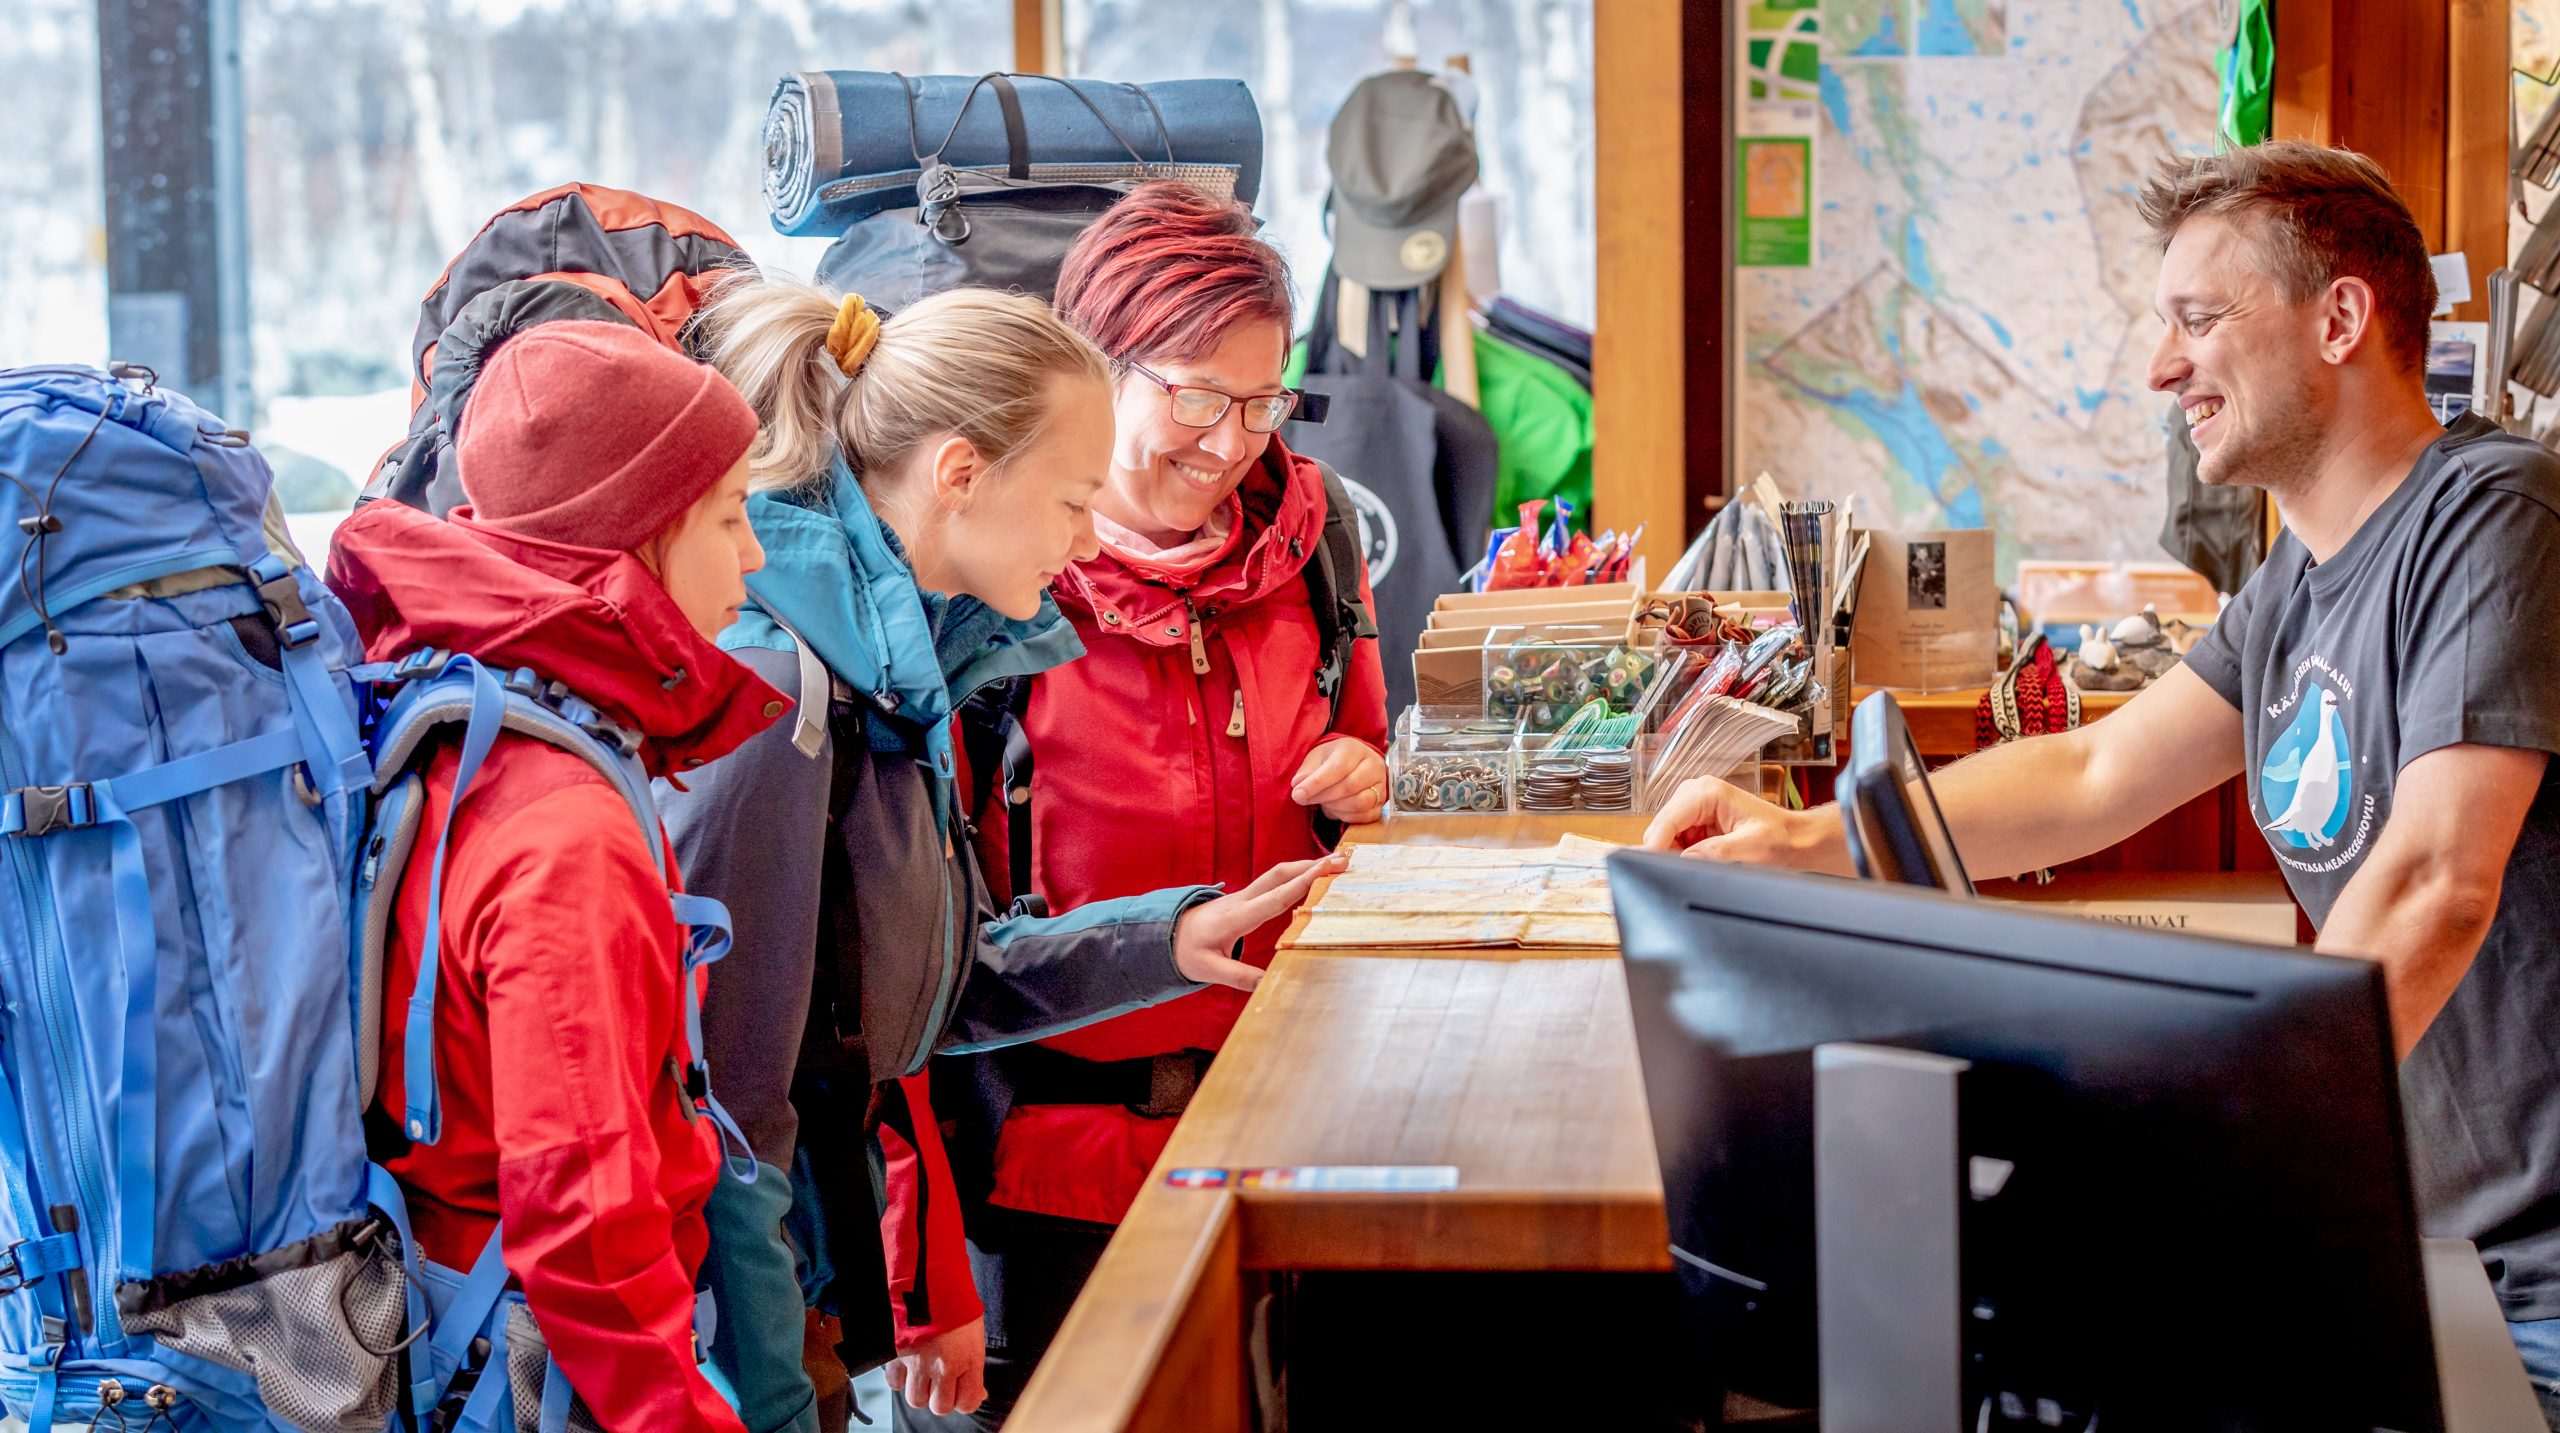 Staff member of the Kilpisjärvi Visitor Centre talking with hikers at the service desk